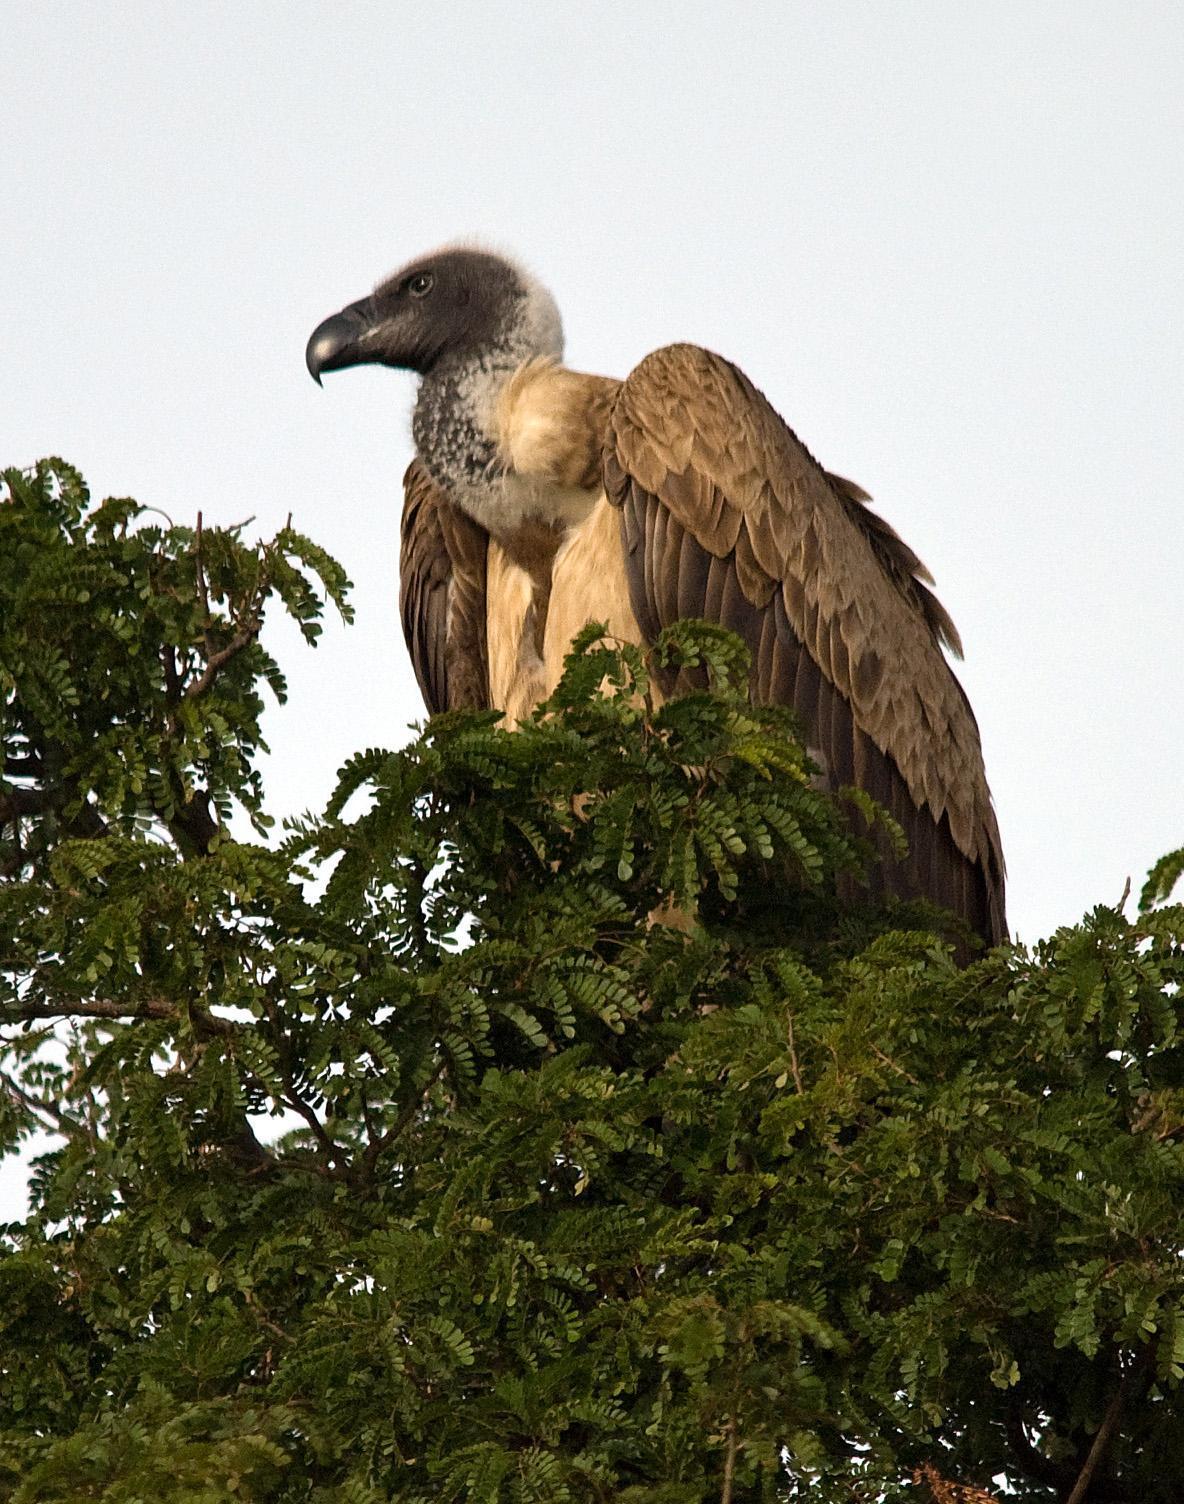 White-backed Vulture Photo by Carol Foil